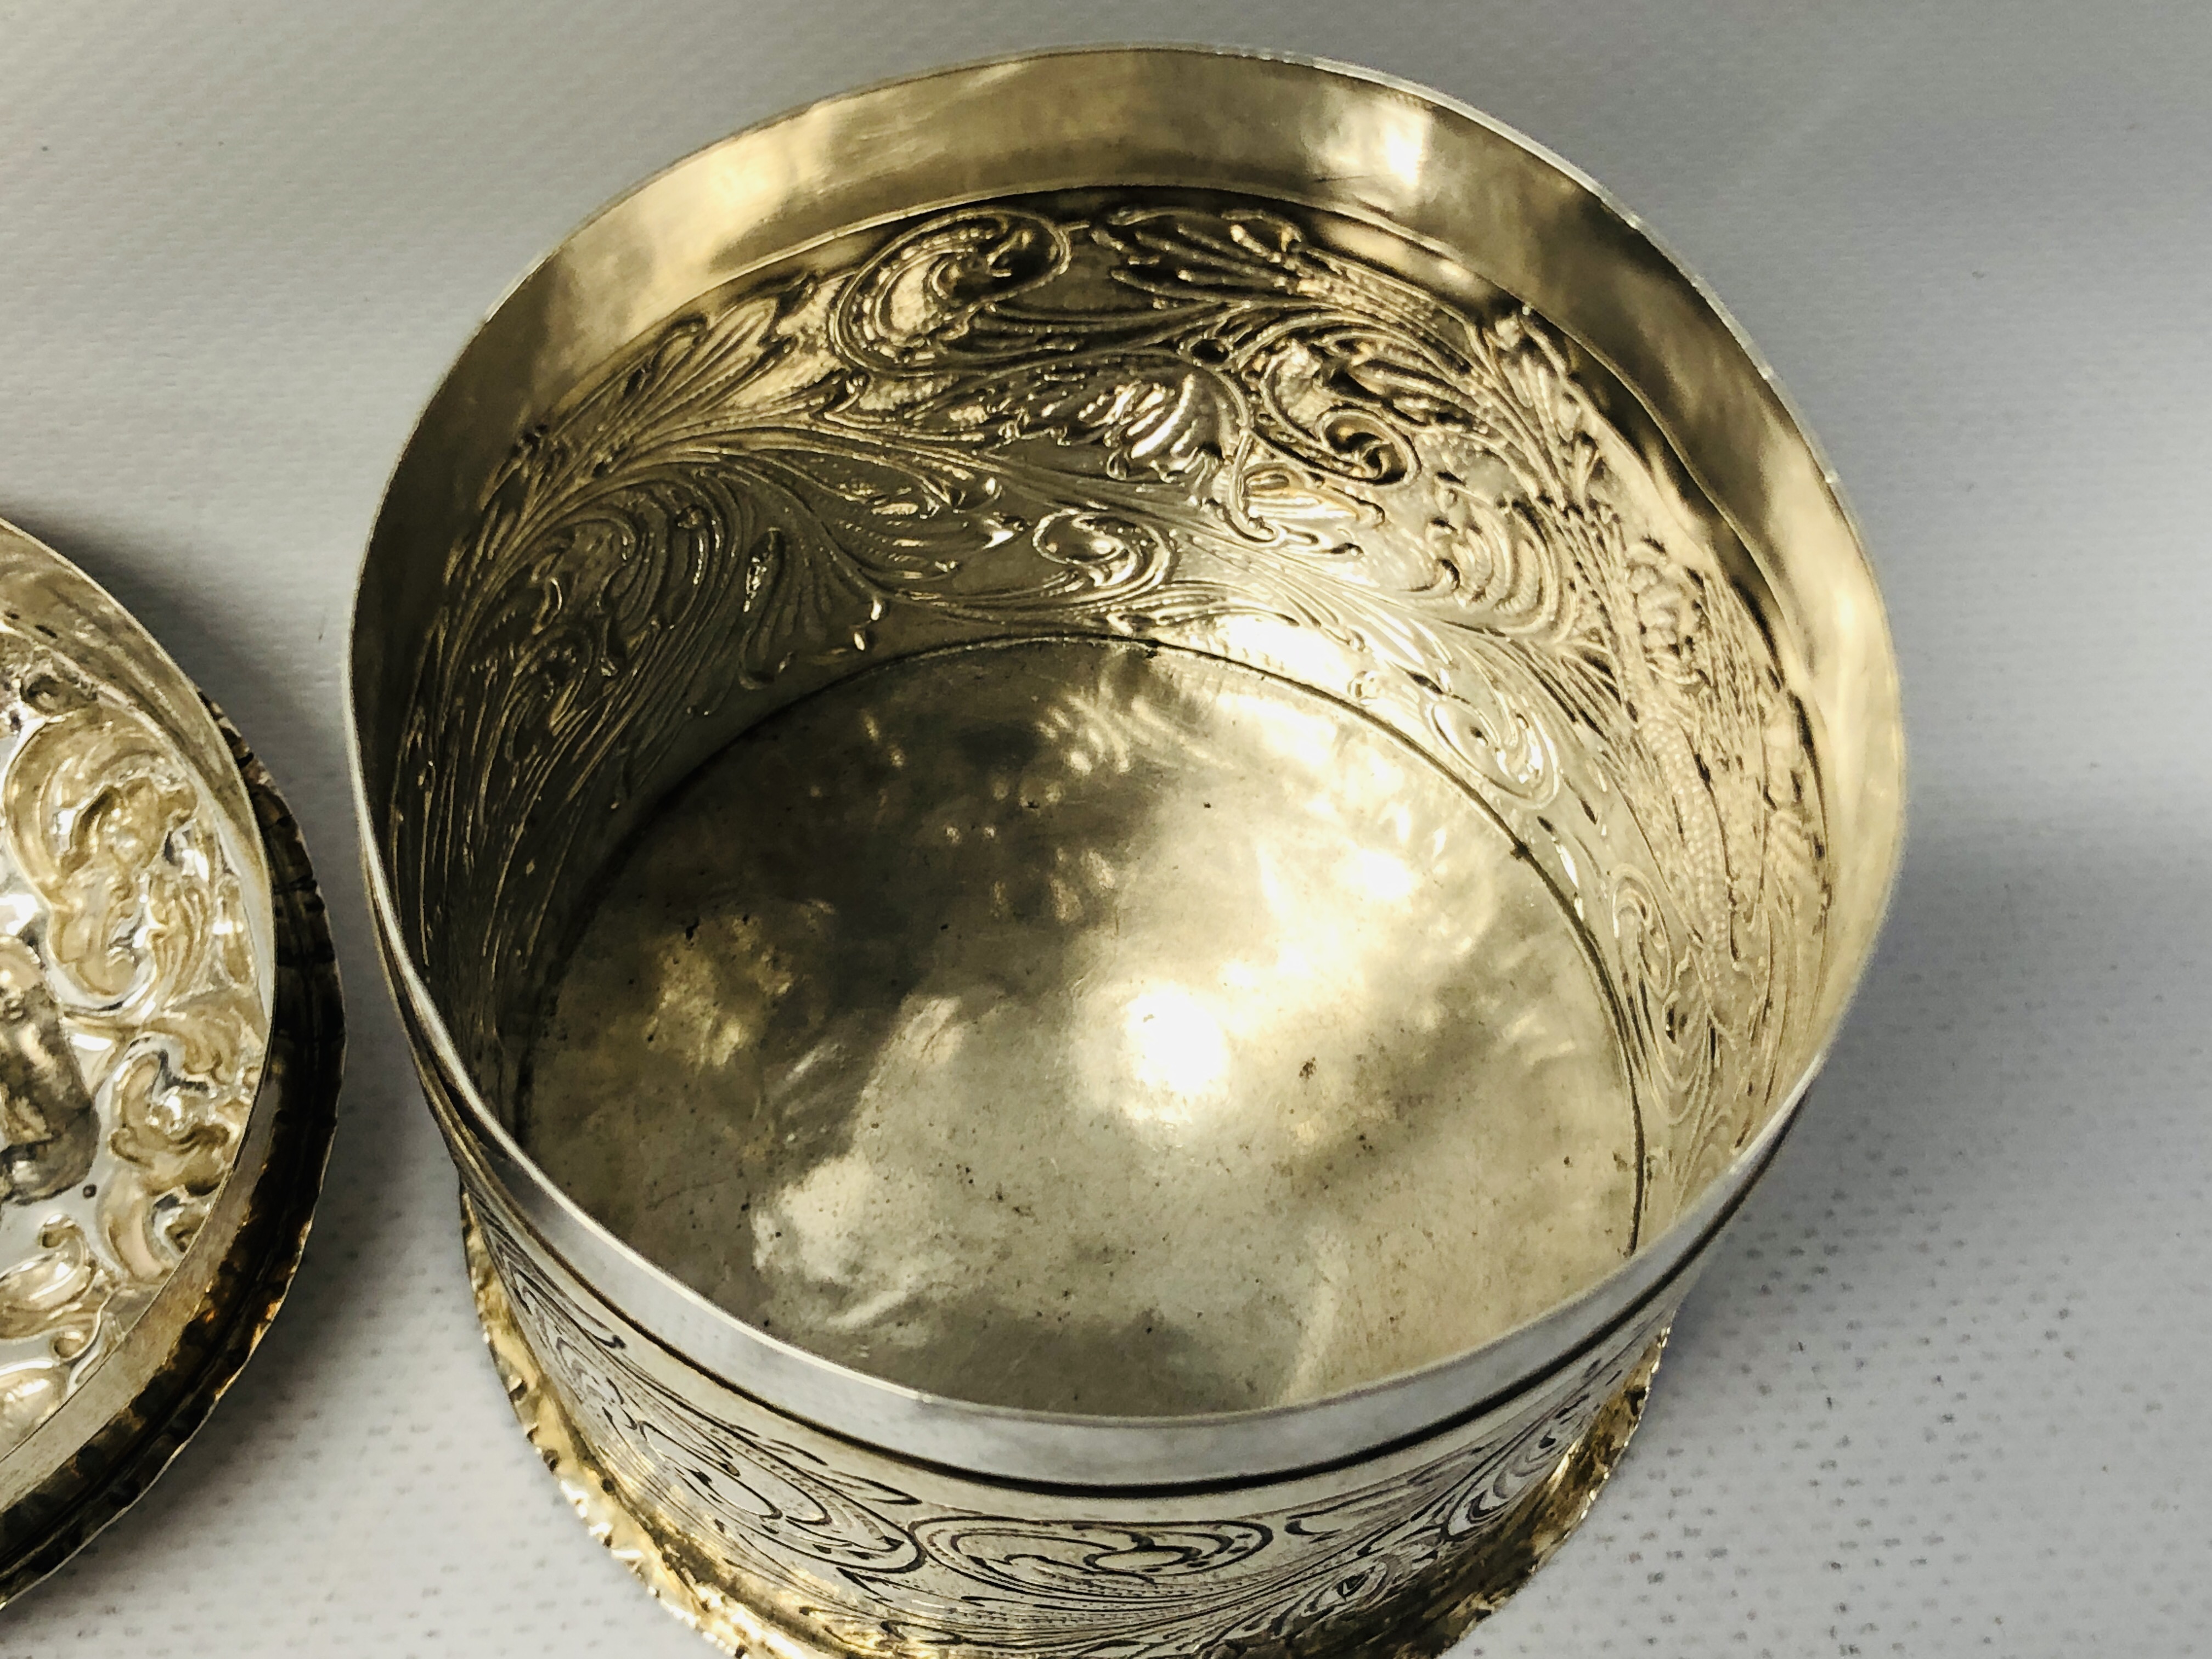 A VICTORIAN SILVER CYLINDRICAL BOX AND COVER DECORATED WITH BIRD LONDON 1888, WILLIAM COMINS - H 8. - Image 19 of 21